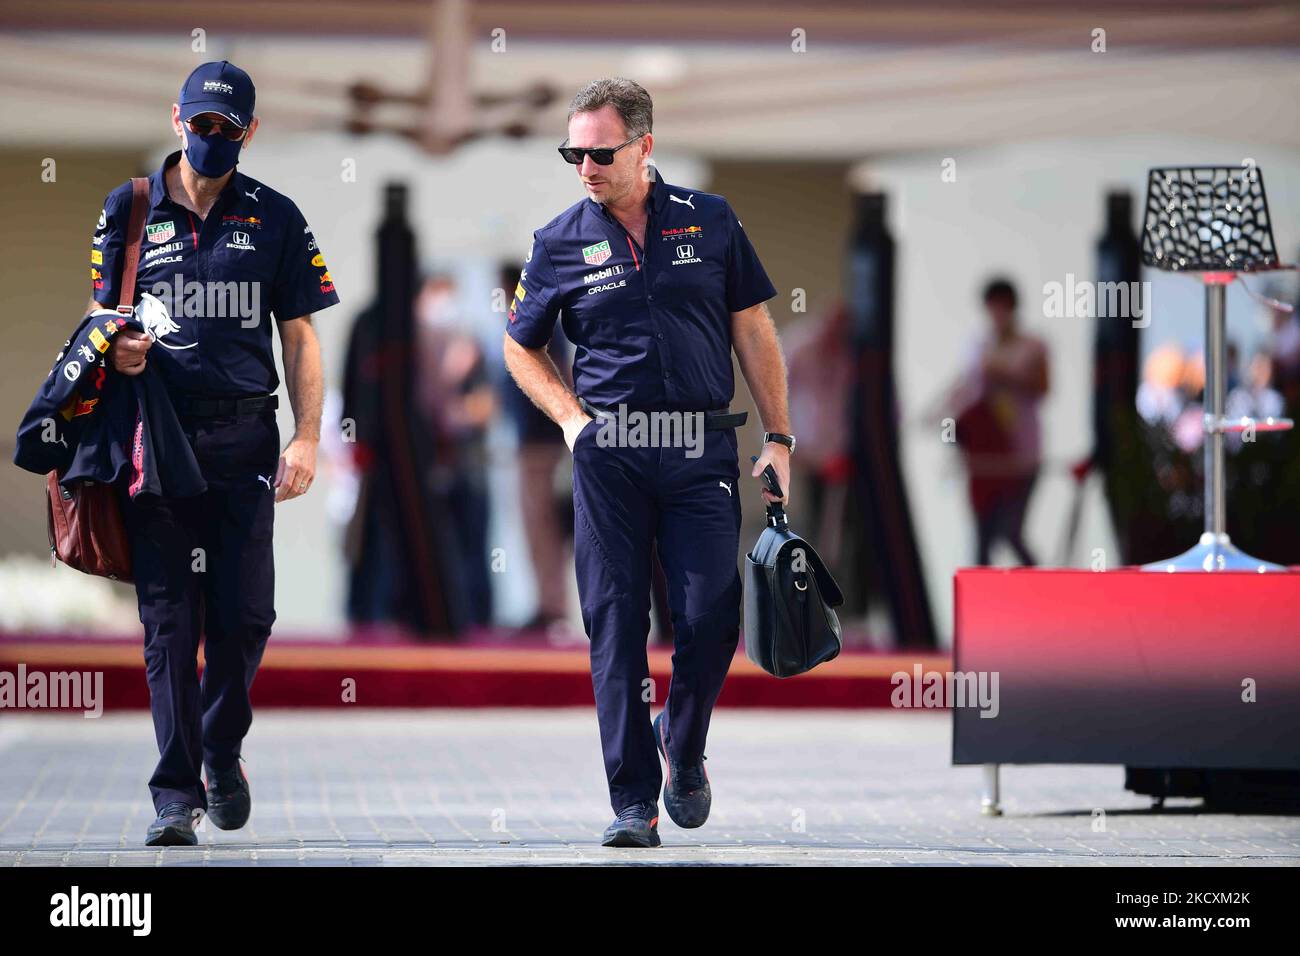 RedBull Racing team principal Christian Horner arrived in to the paddock before qualifying session of last race of the year in Yes Marina Circuit, Yes Island, Abu Dhabi, Uniter Arab Emirates, 11 December 2021 (Photo by Andrea Diodato/NurPhoto) Stock Photo